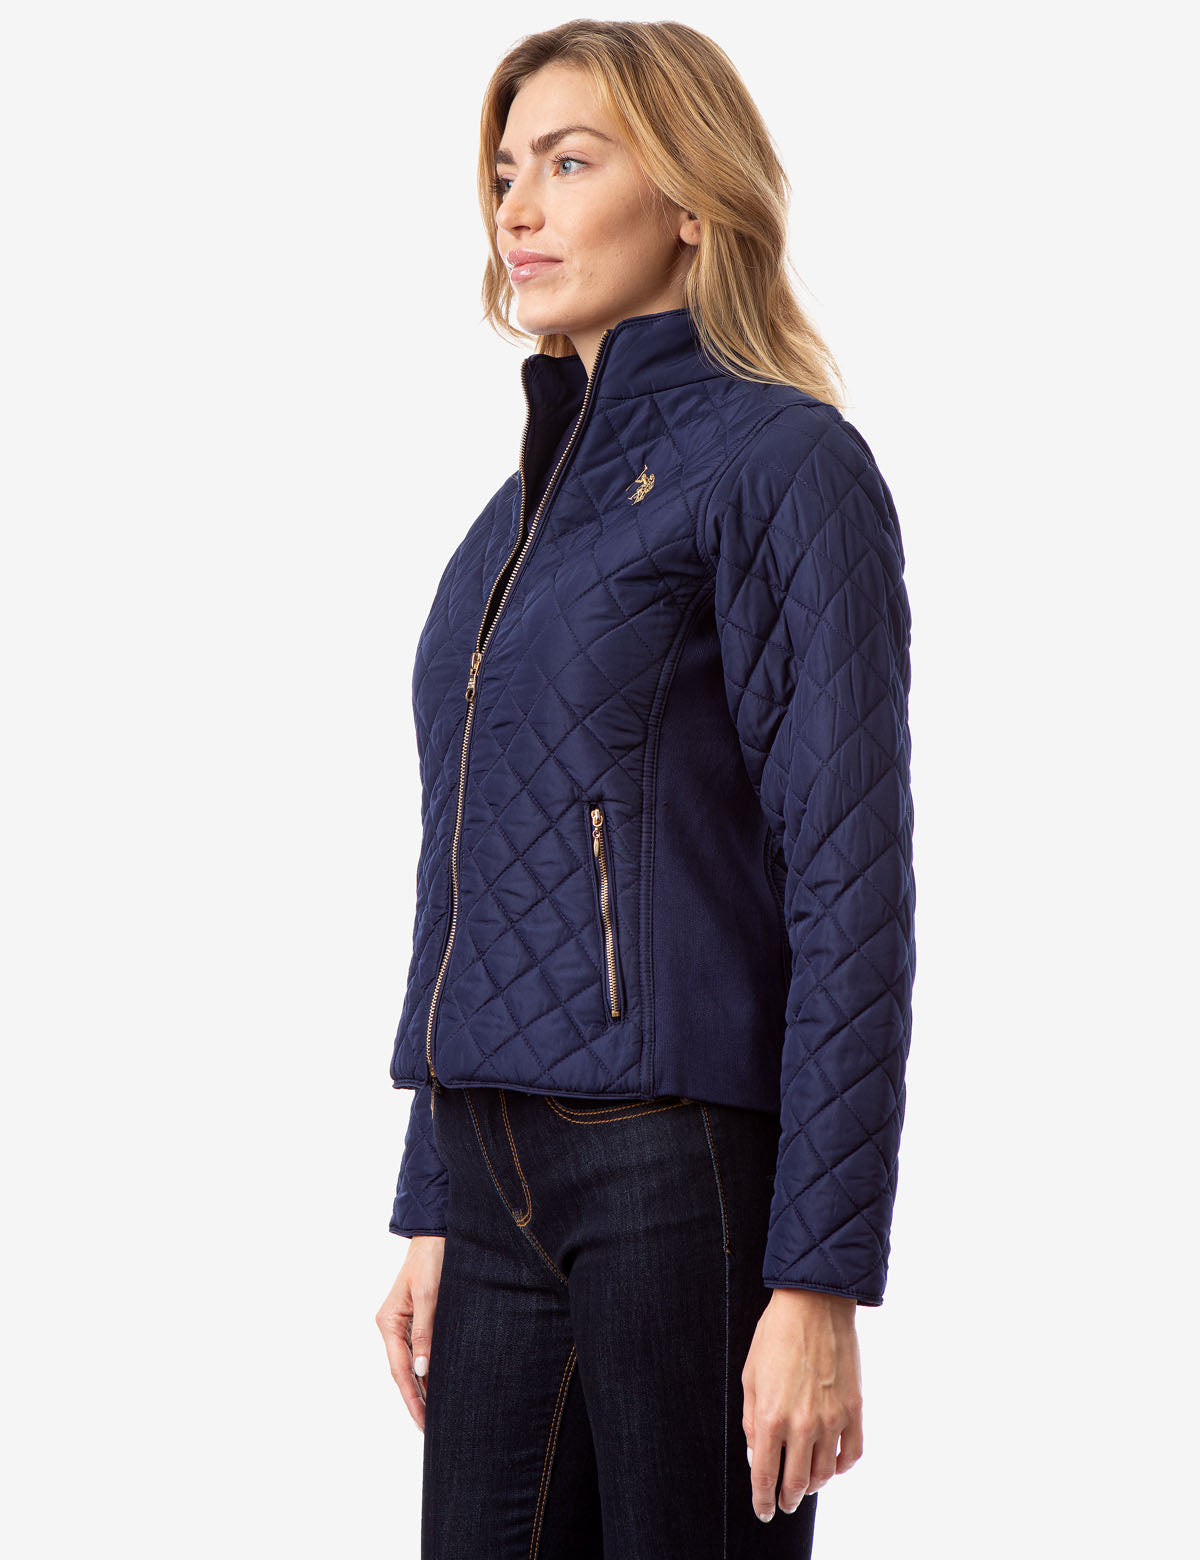 SIDE KNIT QUILTED JACKET - U.S. Polo Assn.